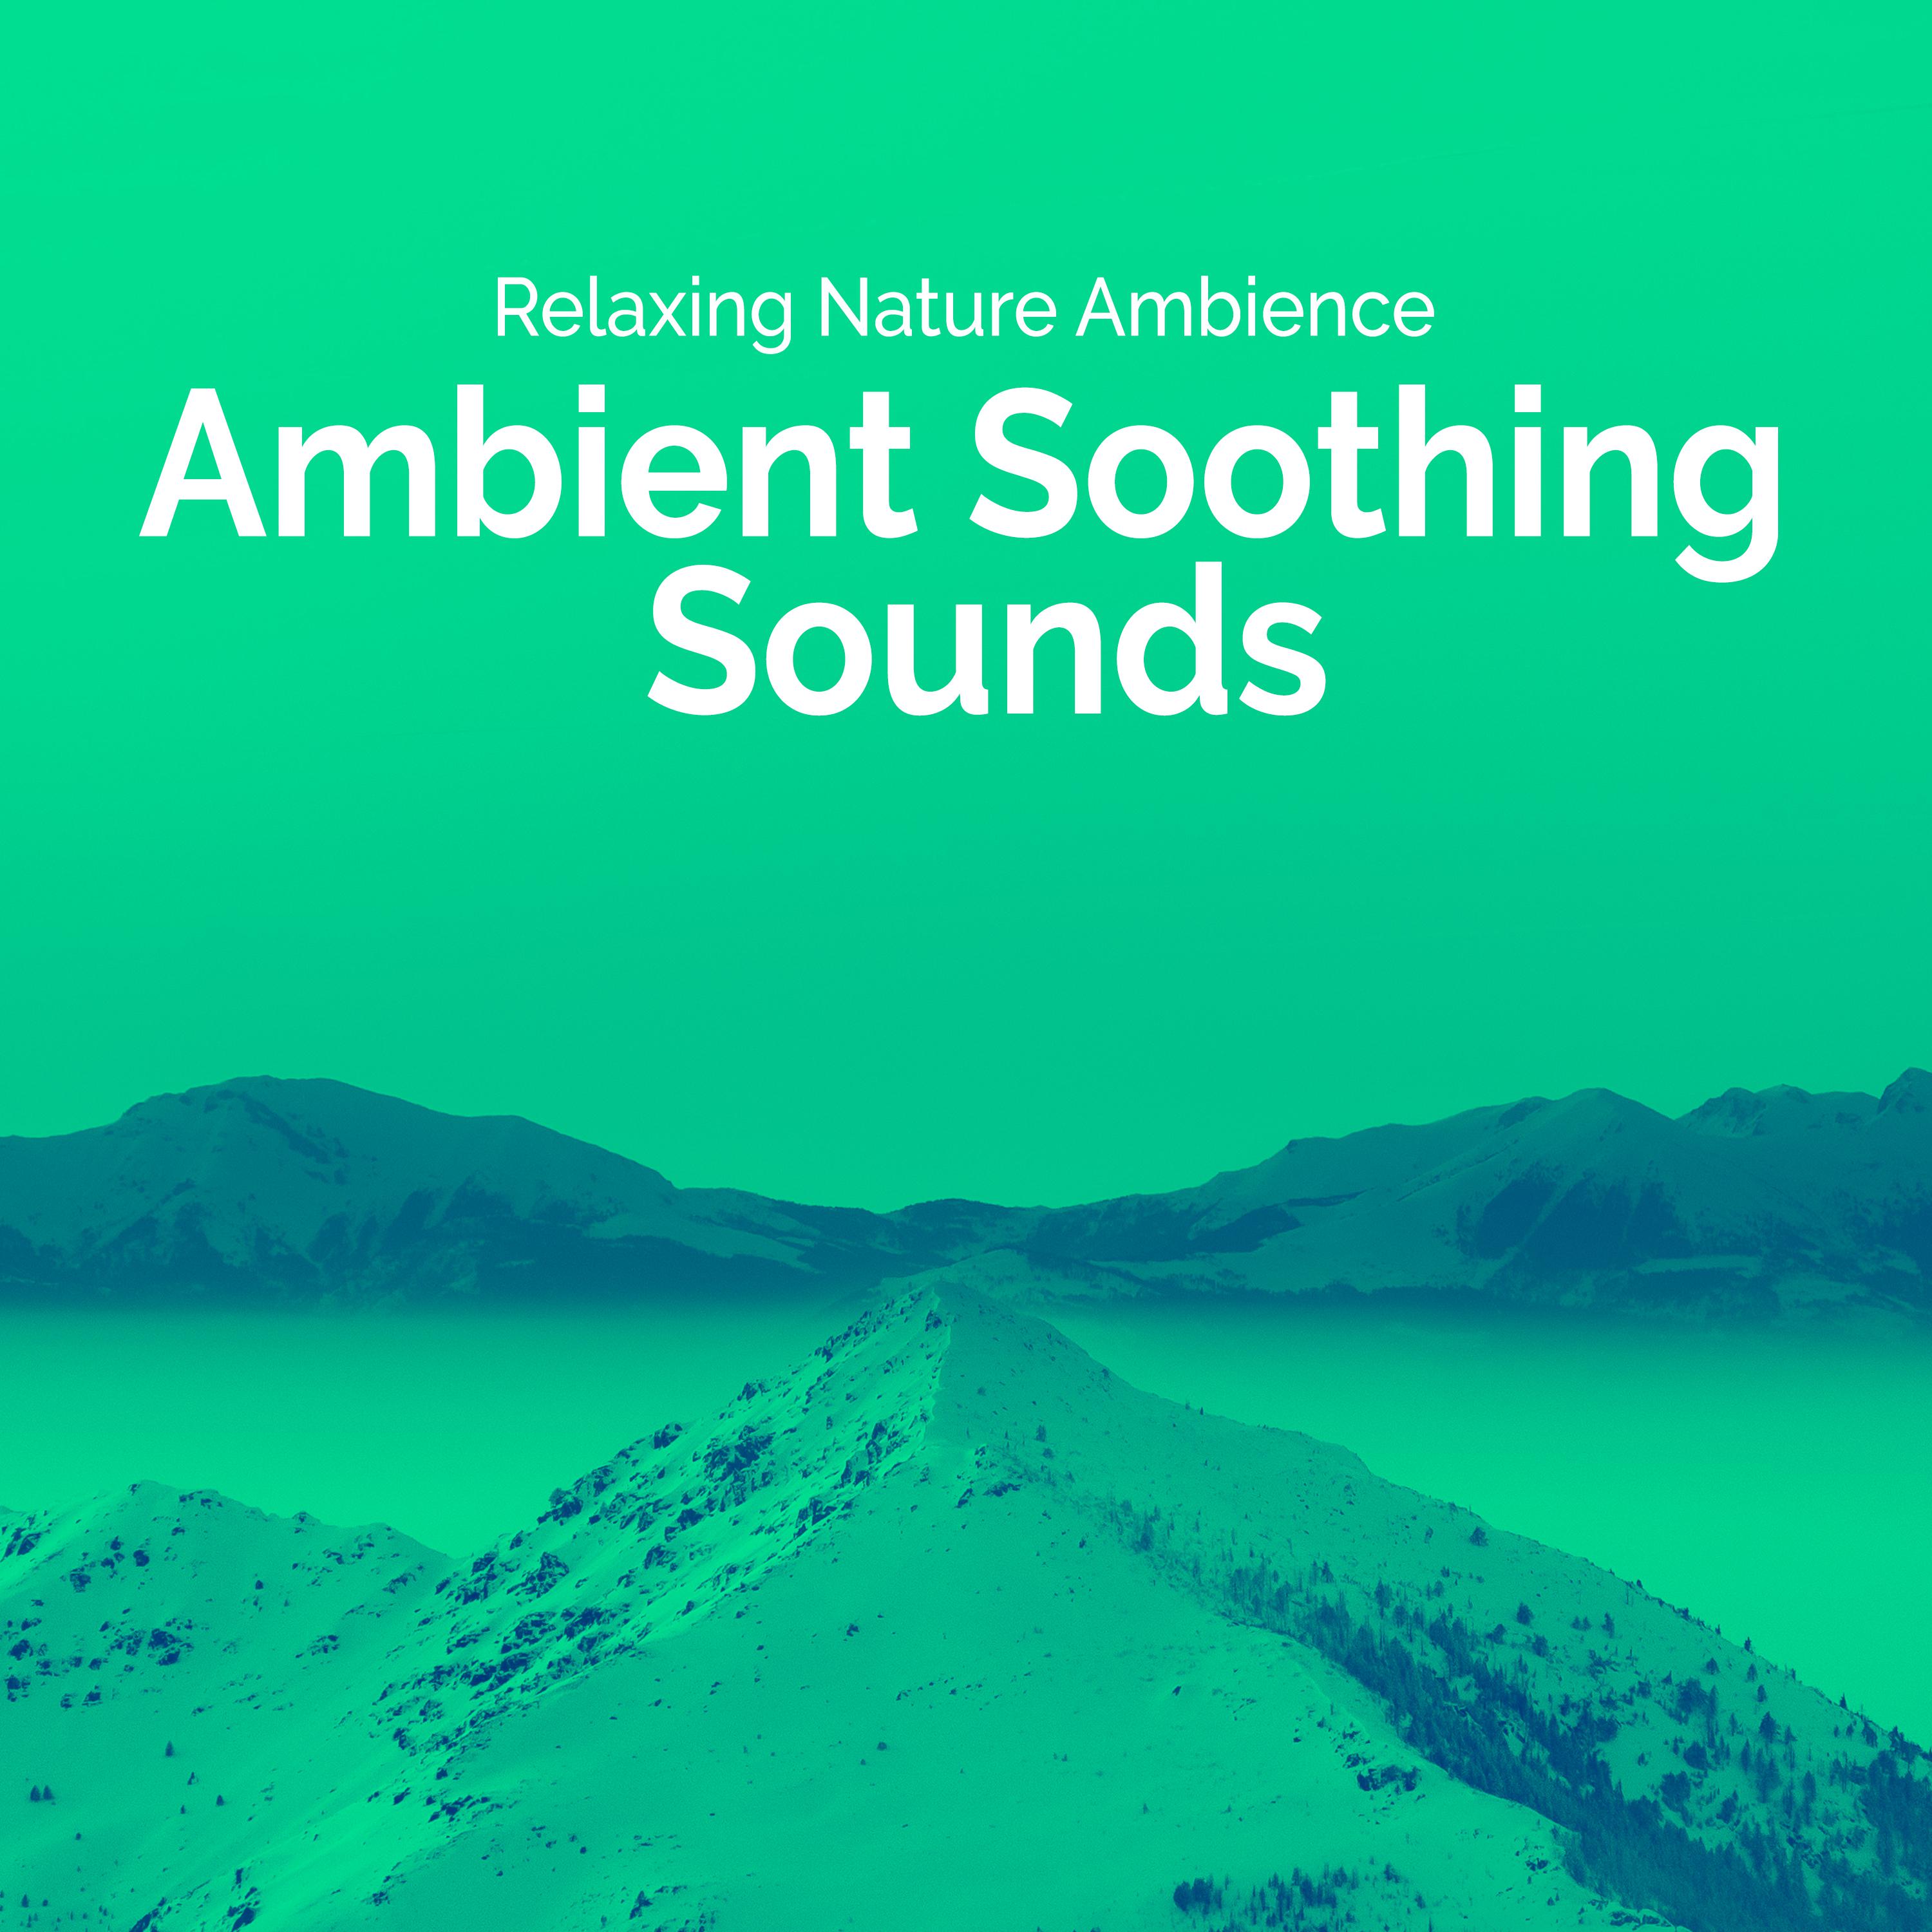 Ambient Soothing Sounds